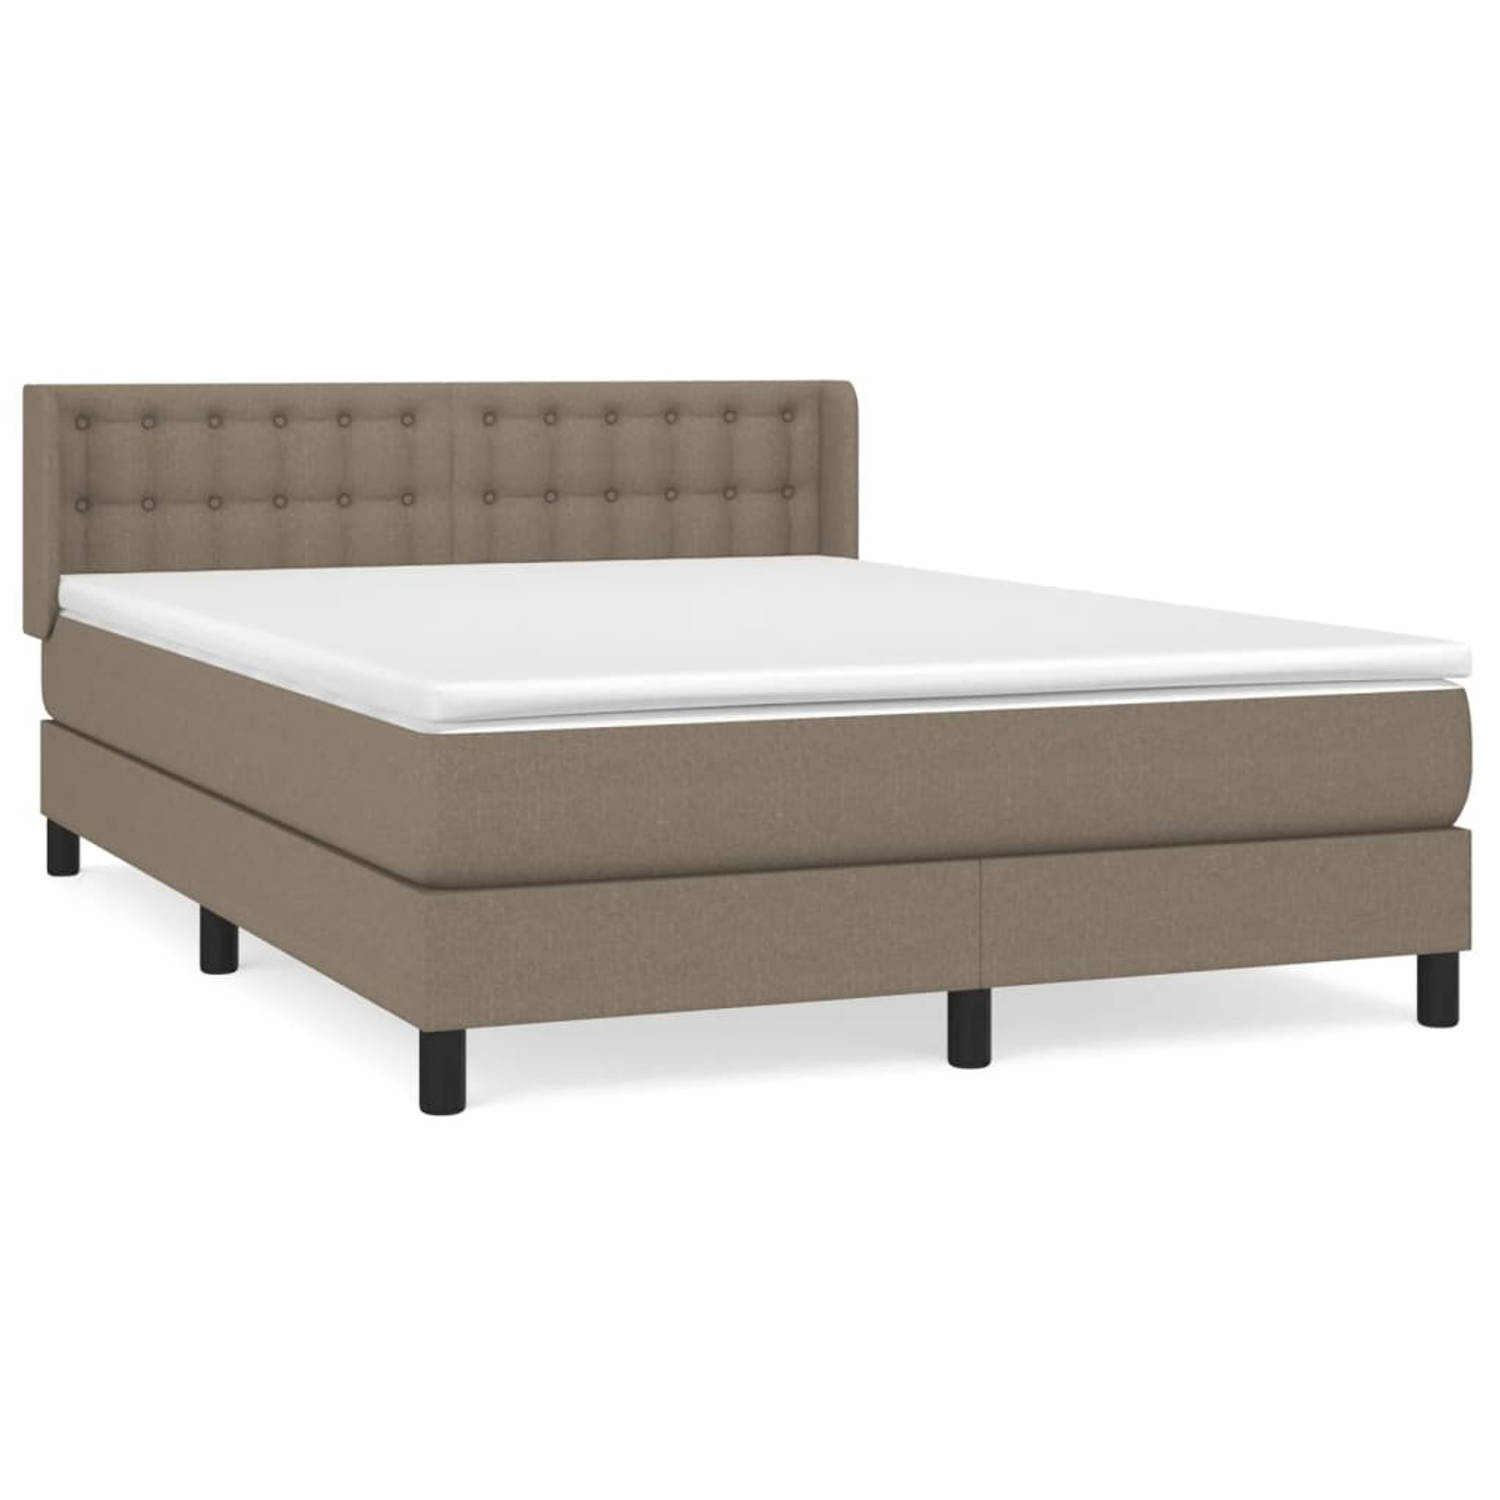 The Living Store Boxspringbed - taupe - 203 x 147 x 78/88 cm - Pocketvering matras - middelharde ondersteuning -